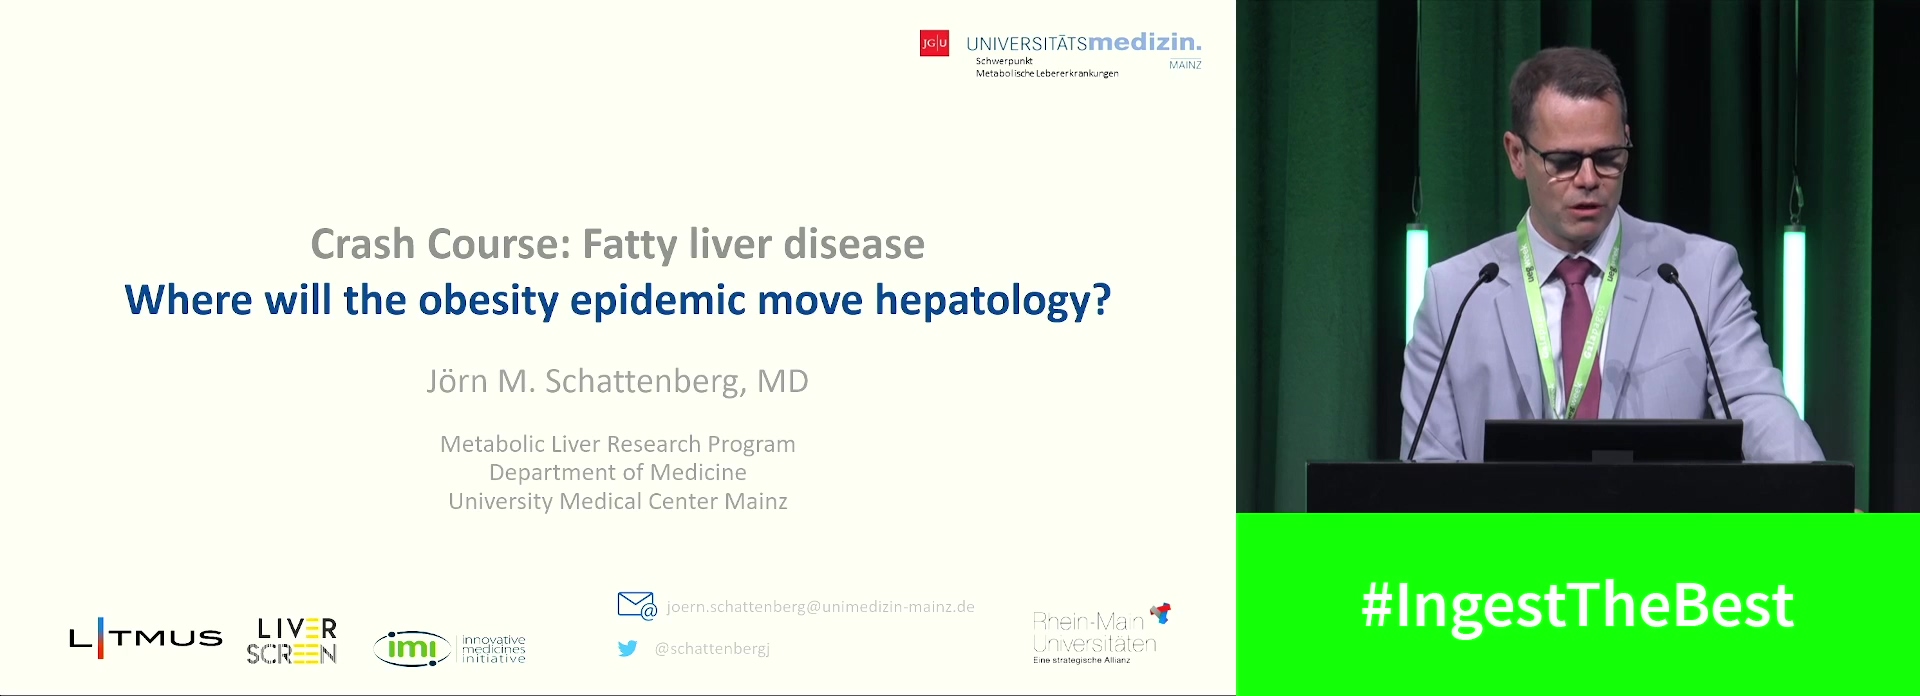 NAFLD: Where will the obesity epidemic move hepatology?